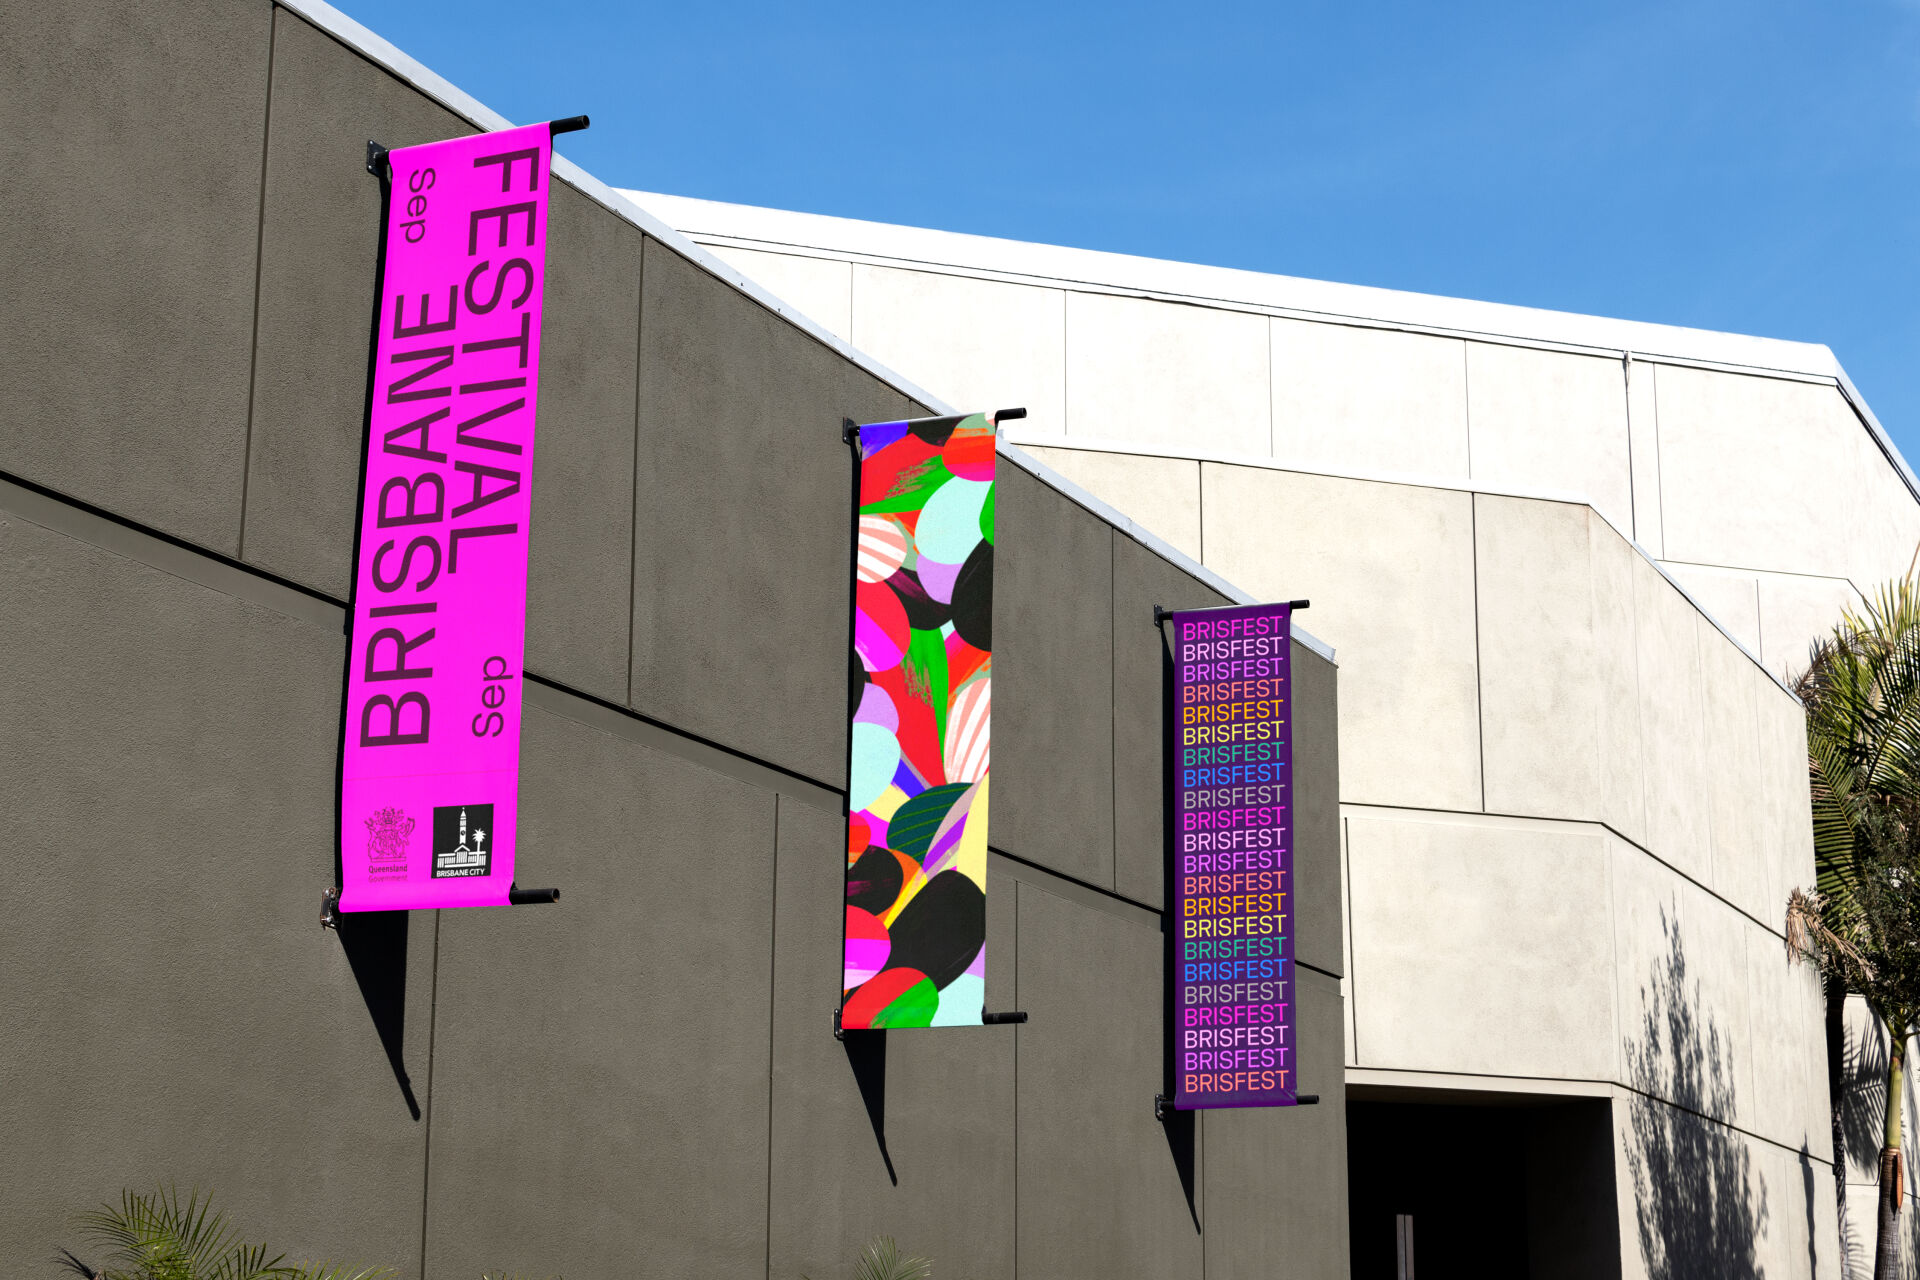 Bright, colourful banners featuring typographic and illustrative designs